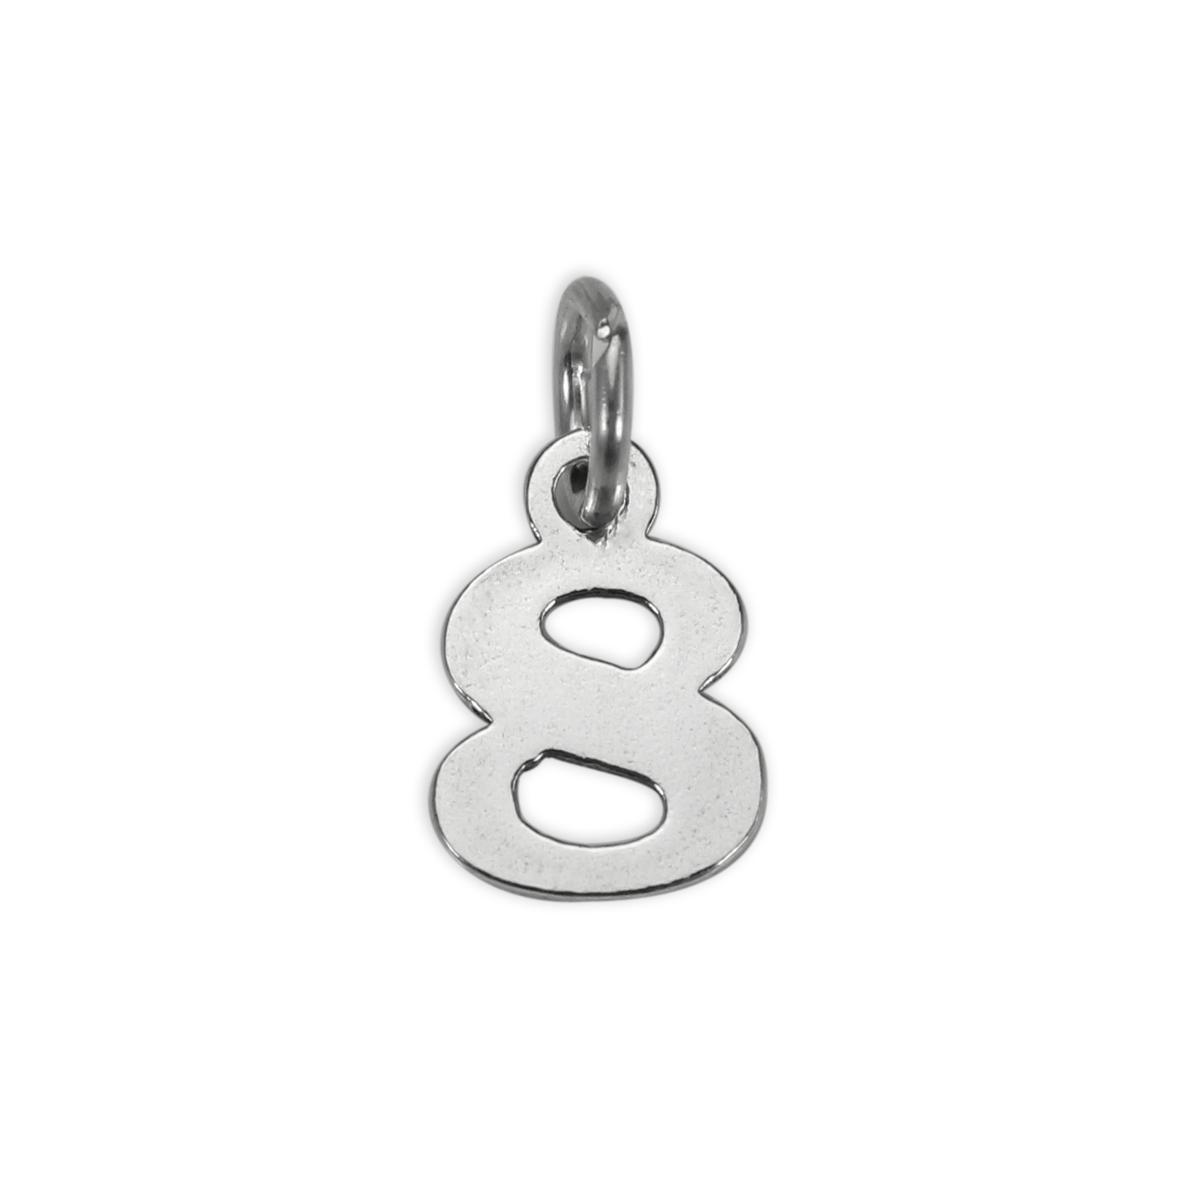 Small Sterling Silver Number Charm 0 - 9